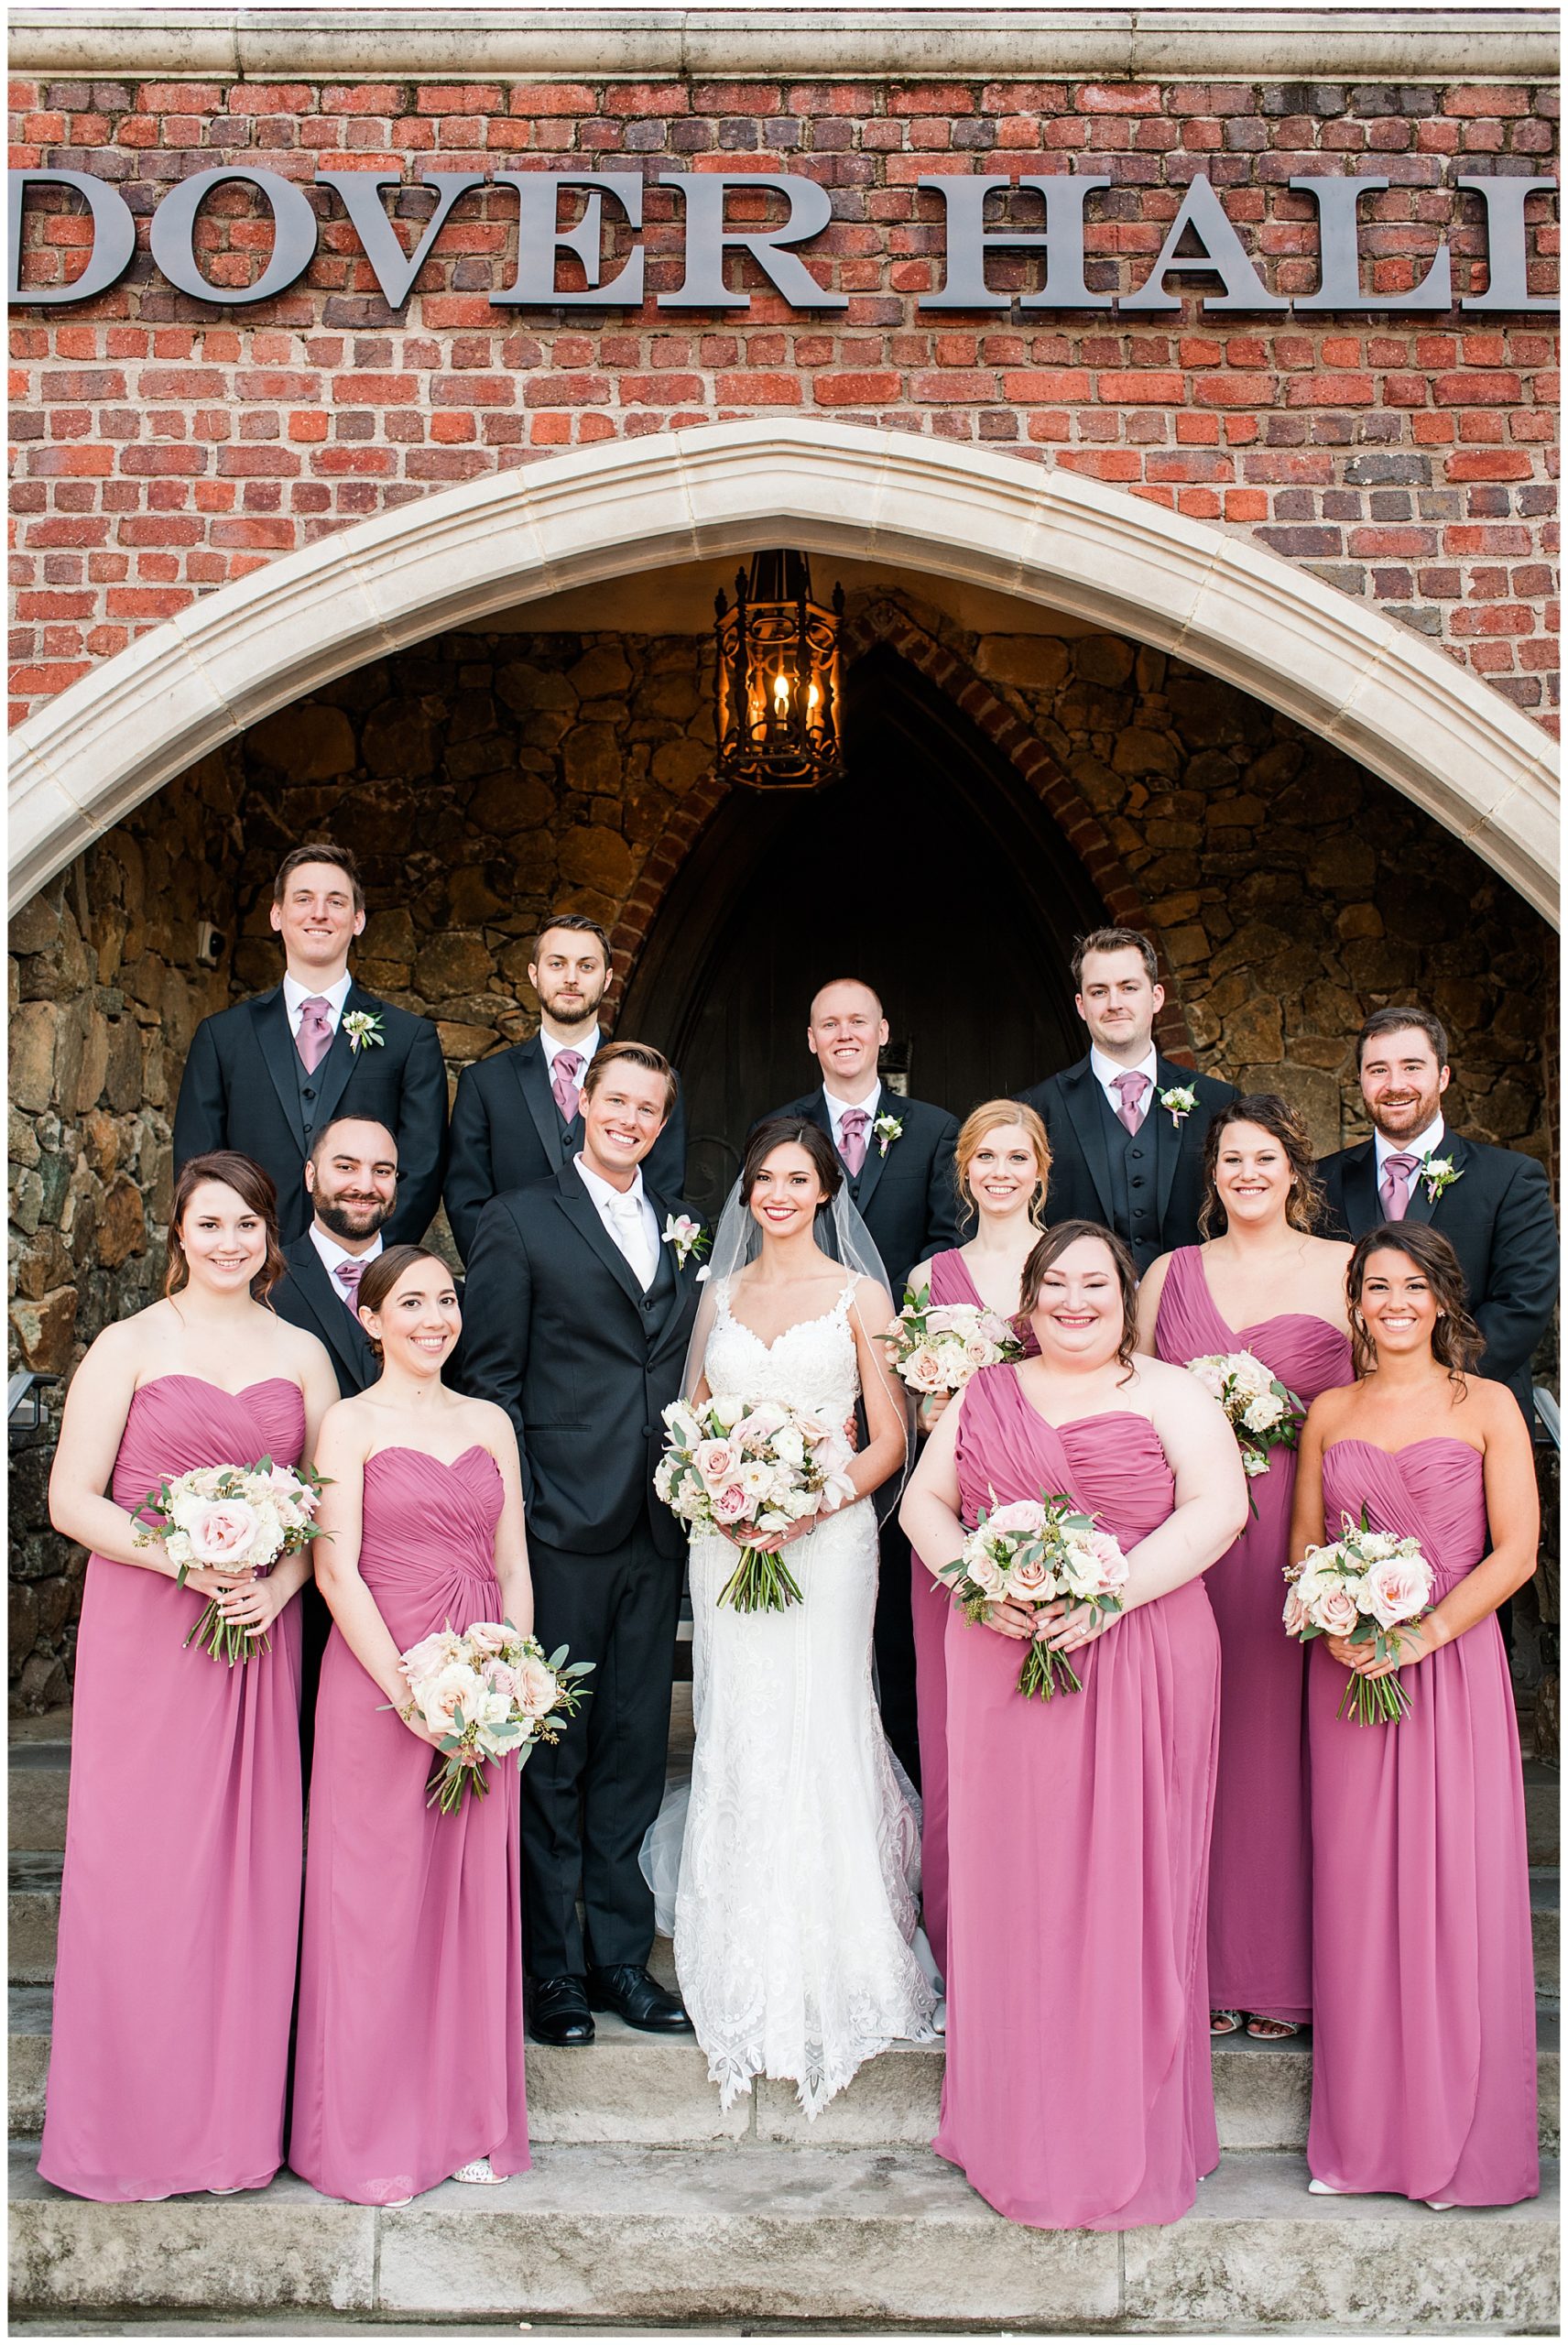 bride and groom formal portraits with wedding party at dover hall estate. by sarah & dave photographer, richmond rva wedding photographer.